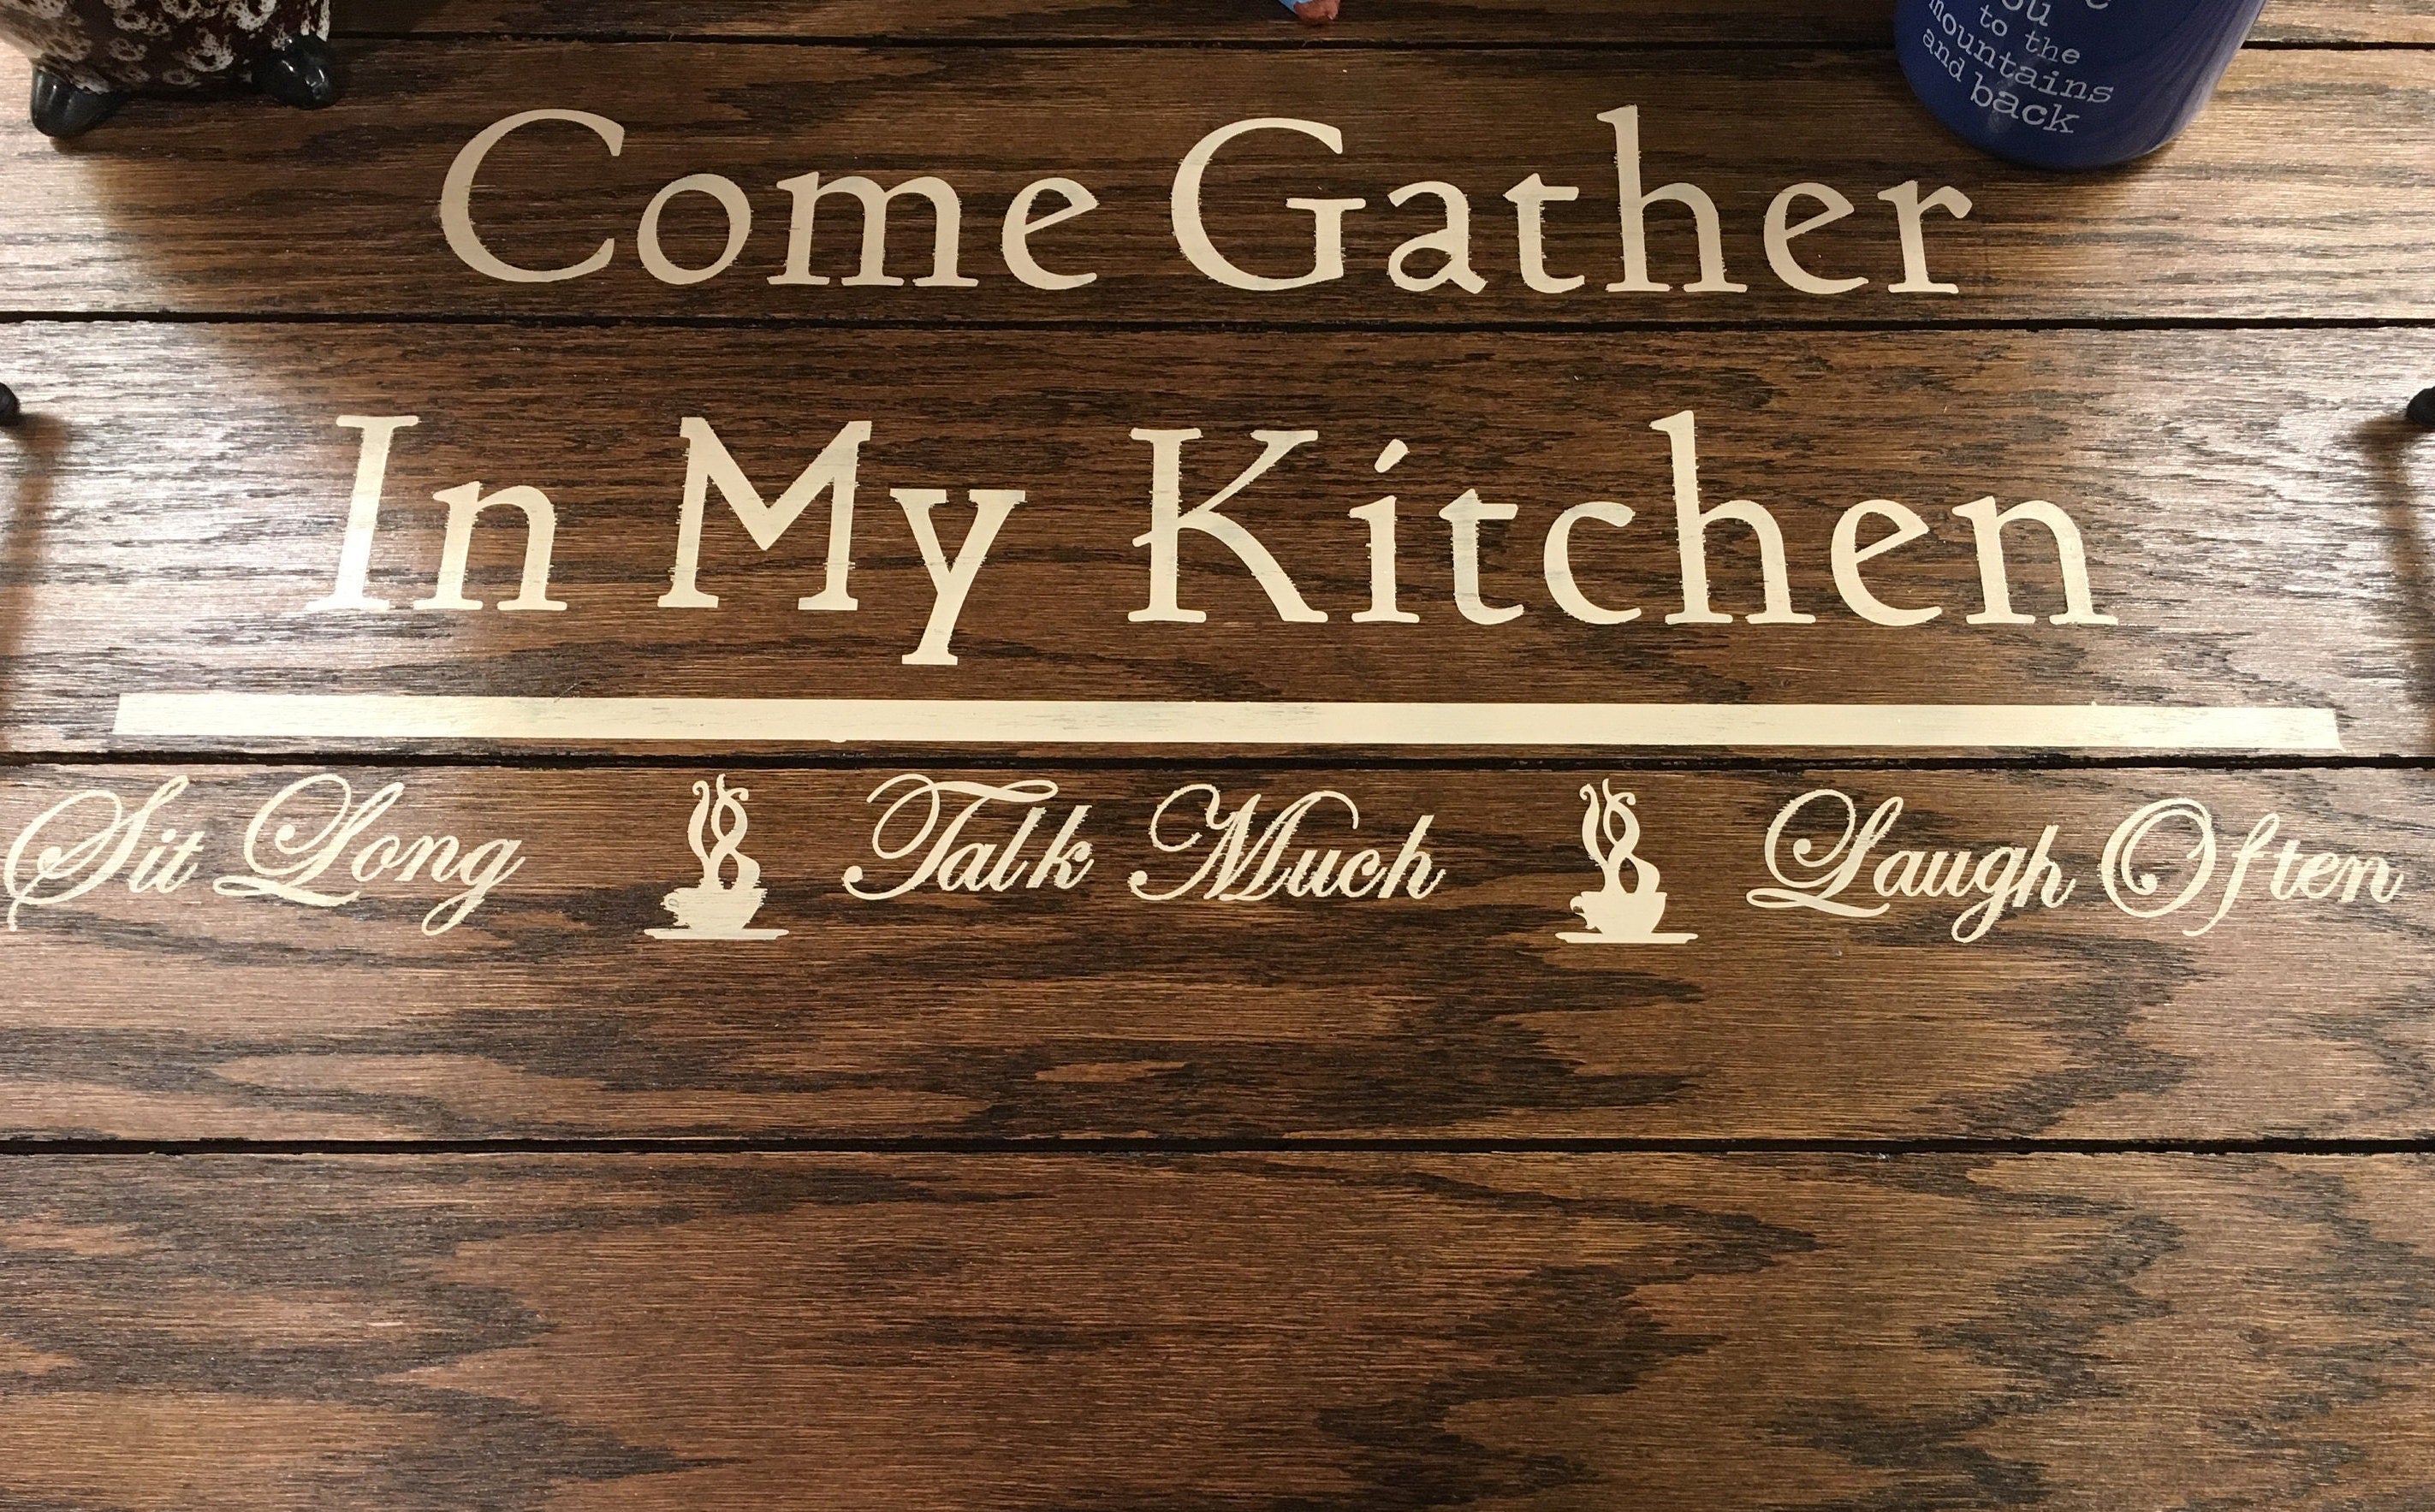 stove top cover/Noodle Board/ Wooden Stove Cover/ Custom Stove Cover/ Kitchen Decor Farmhouse Tray/Gift/Birthday